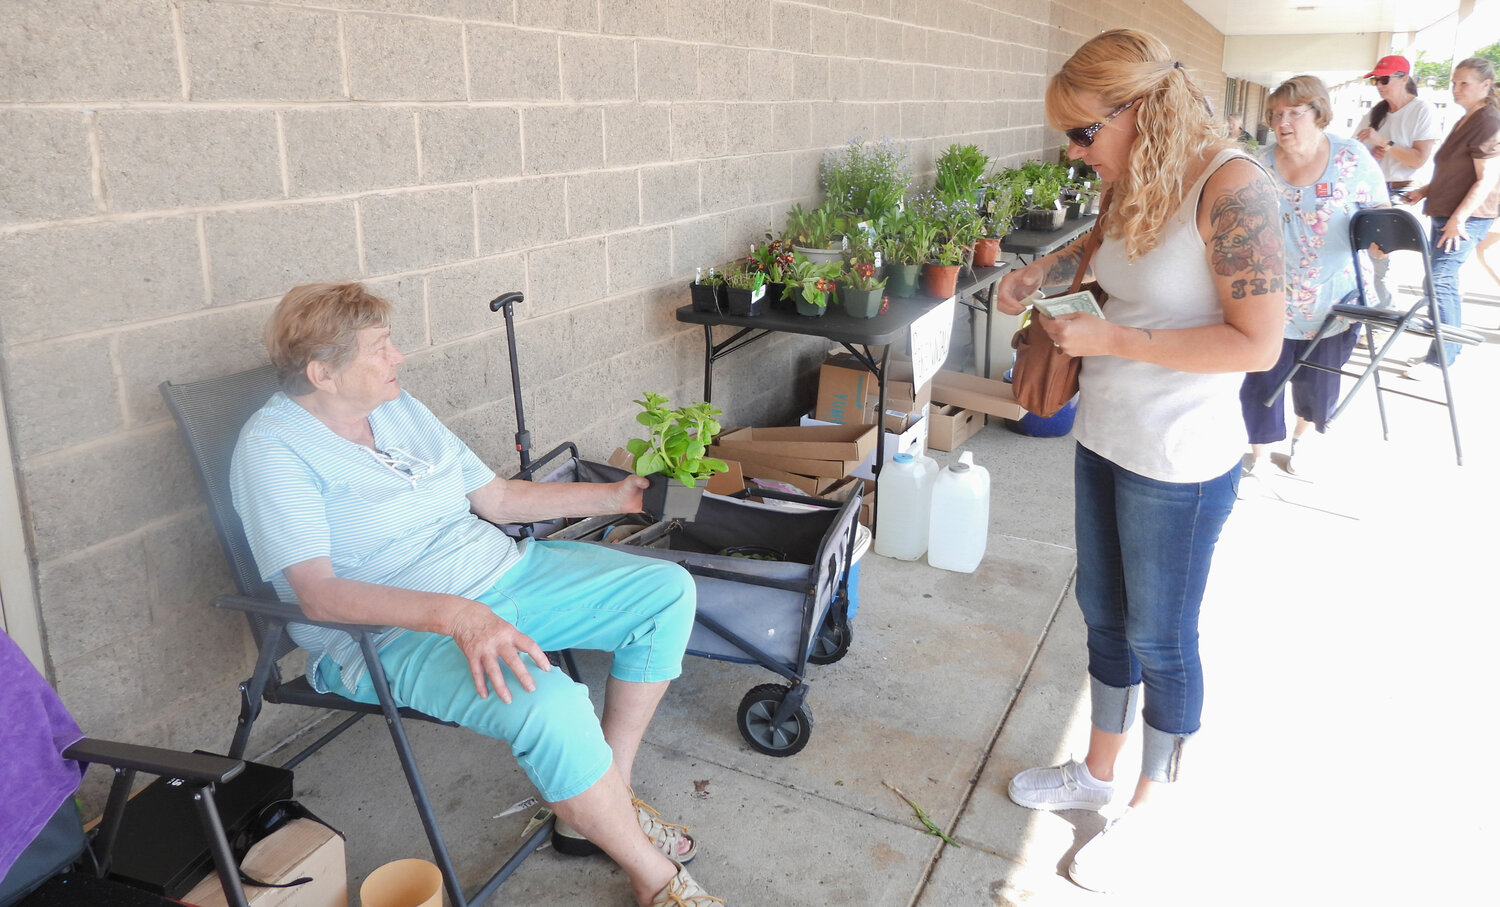 Mabel Smith, a member of the Green Thumb Garden Club of Oneida Castle, talks to a customer at the garden sale on Friday, May 12 before making a sale.